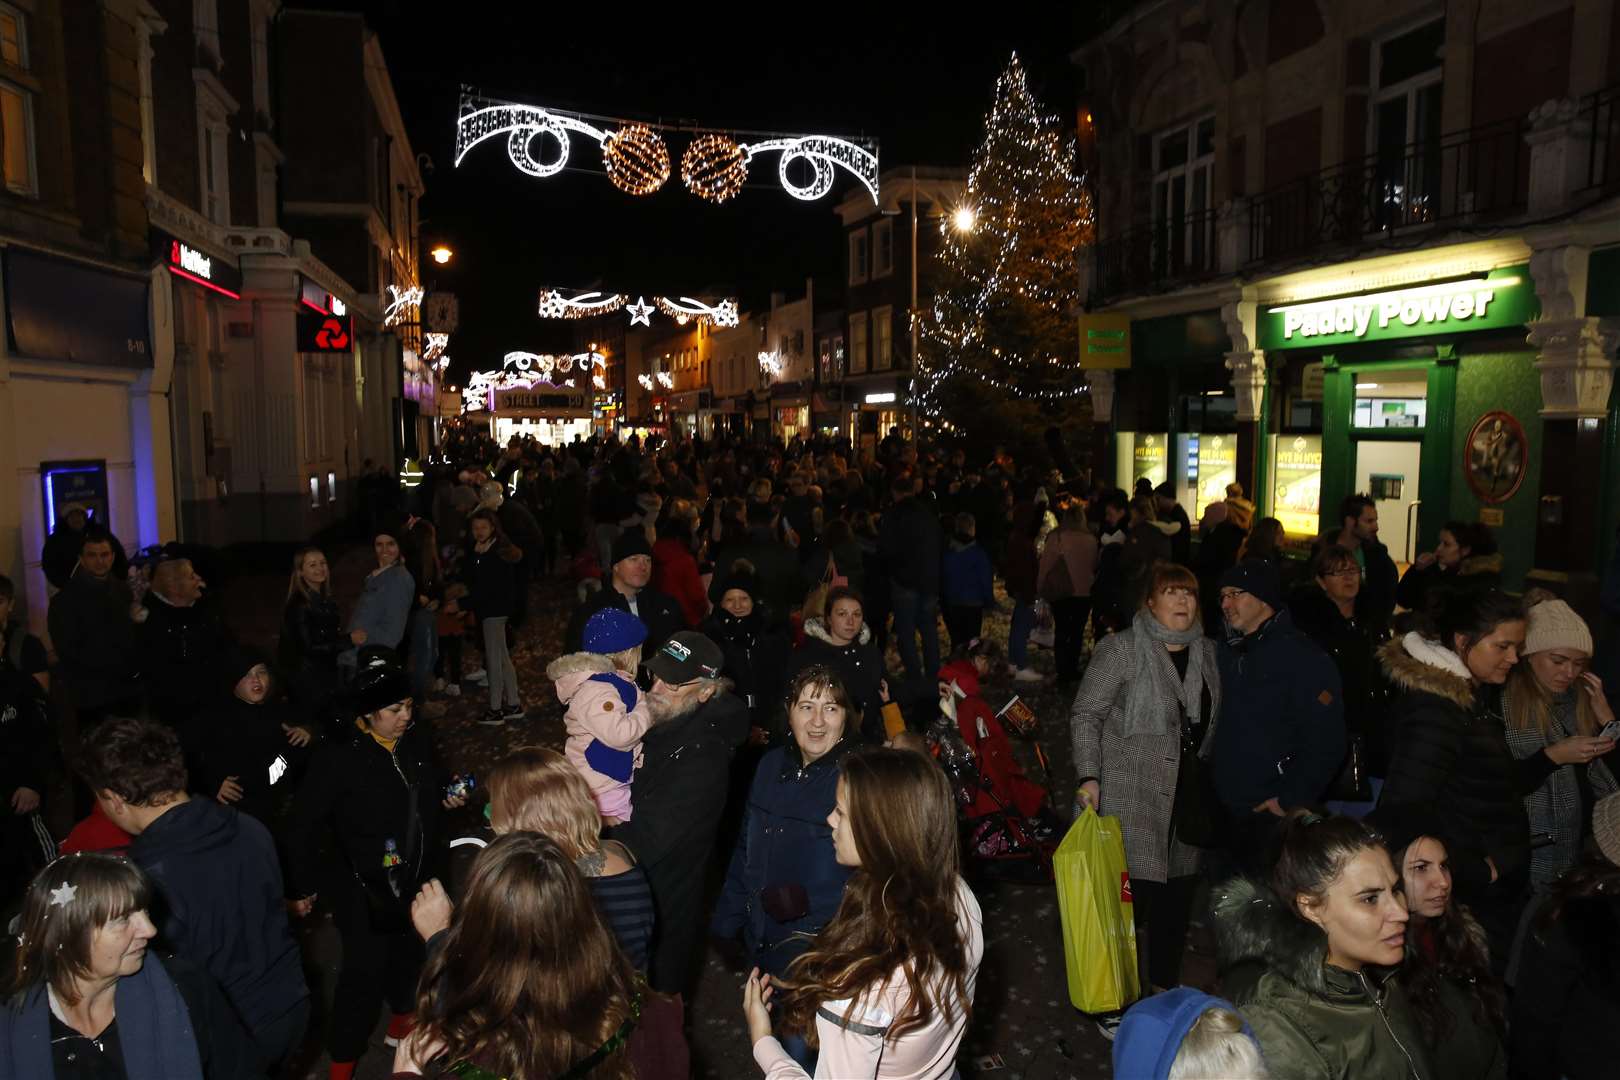 Members of the public headed to Dartford for the Christmas lights. Credit: Dartford council/ Andy Barnes